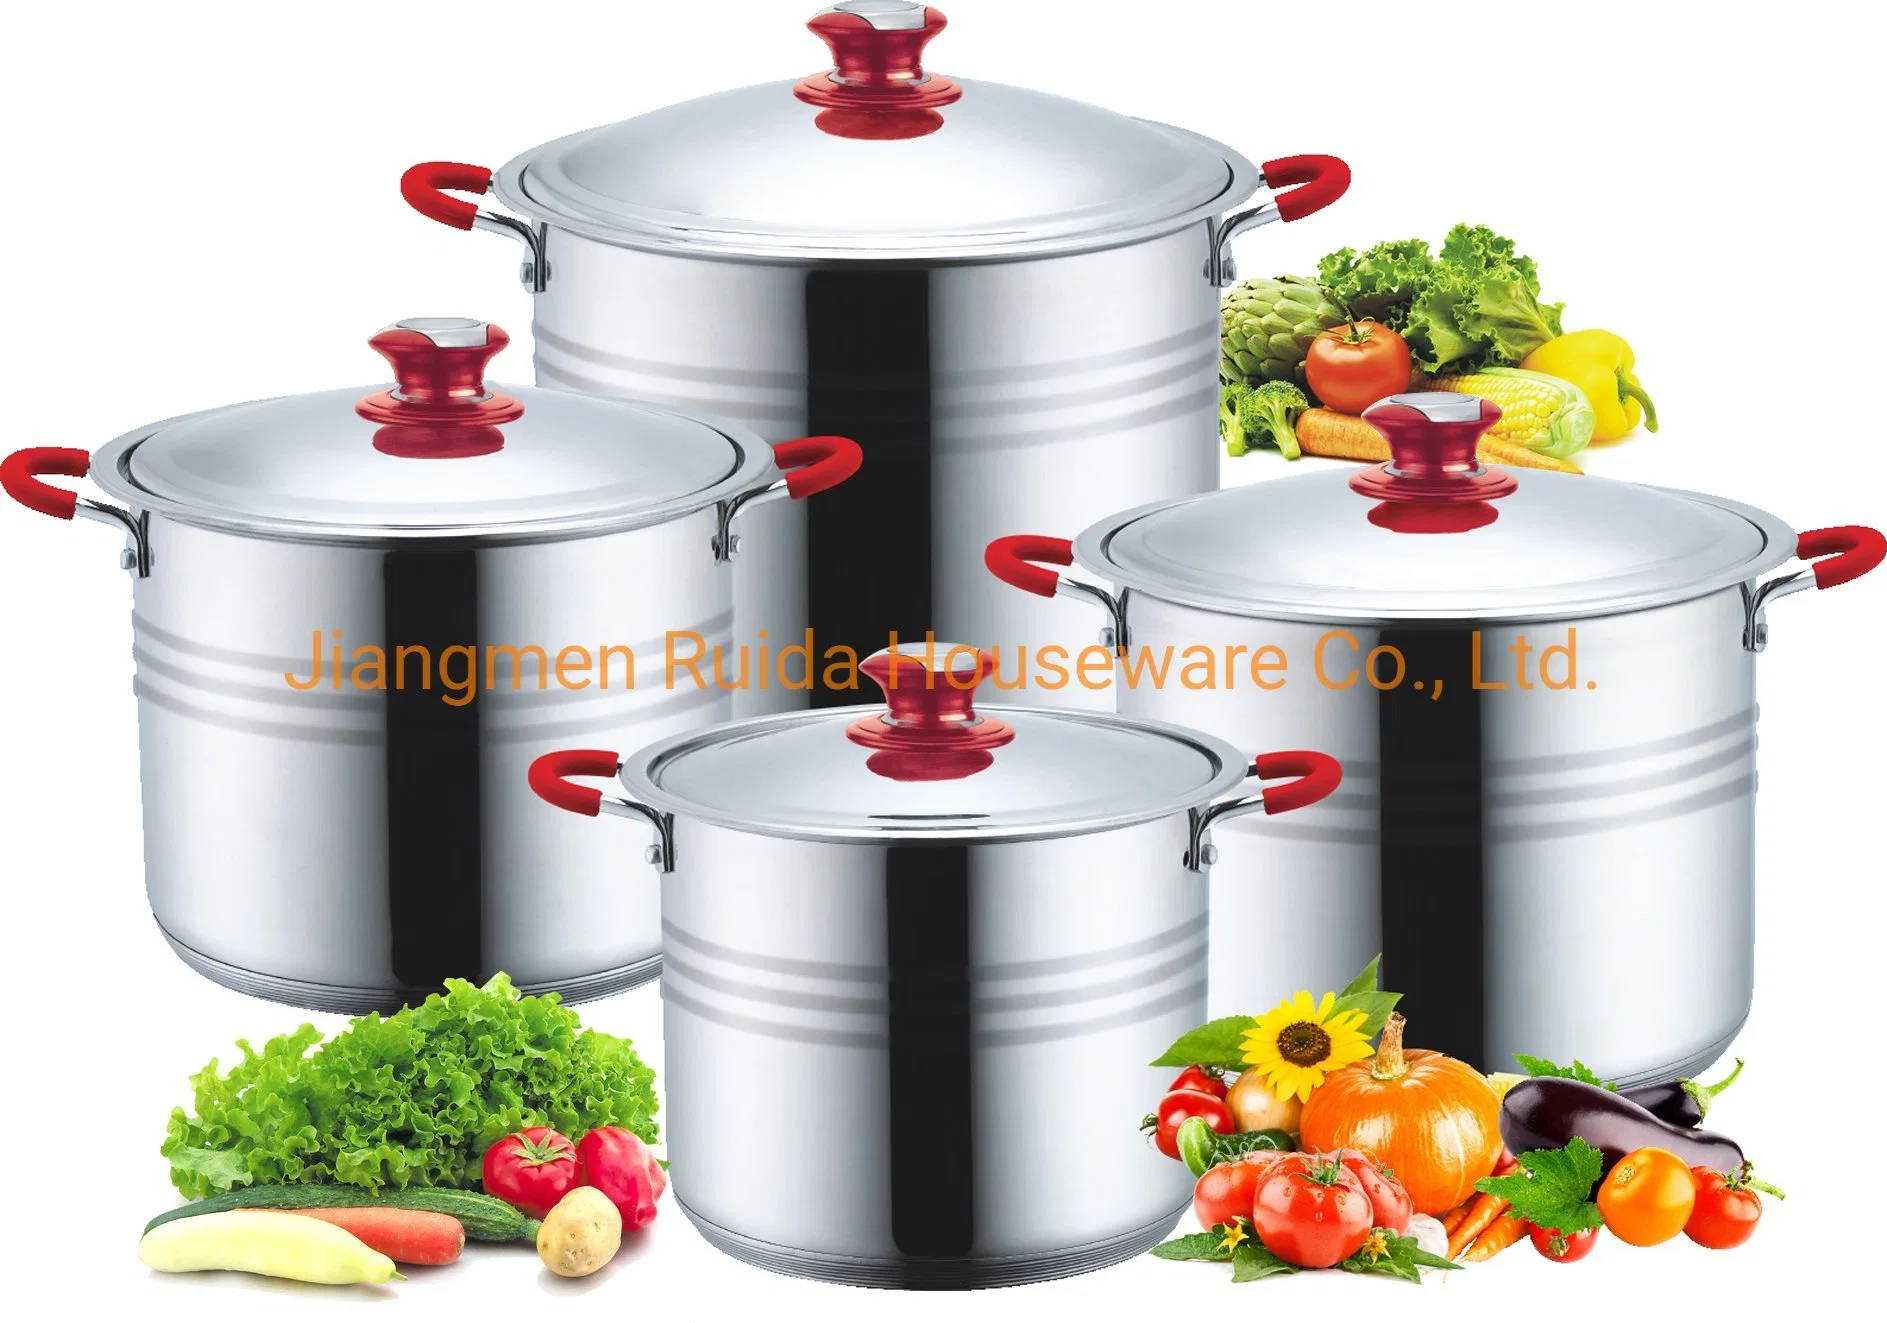 Stainless Steel Stock Pot Cookware in Various Sizes Are Available Cookware Set Kitchen Ware